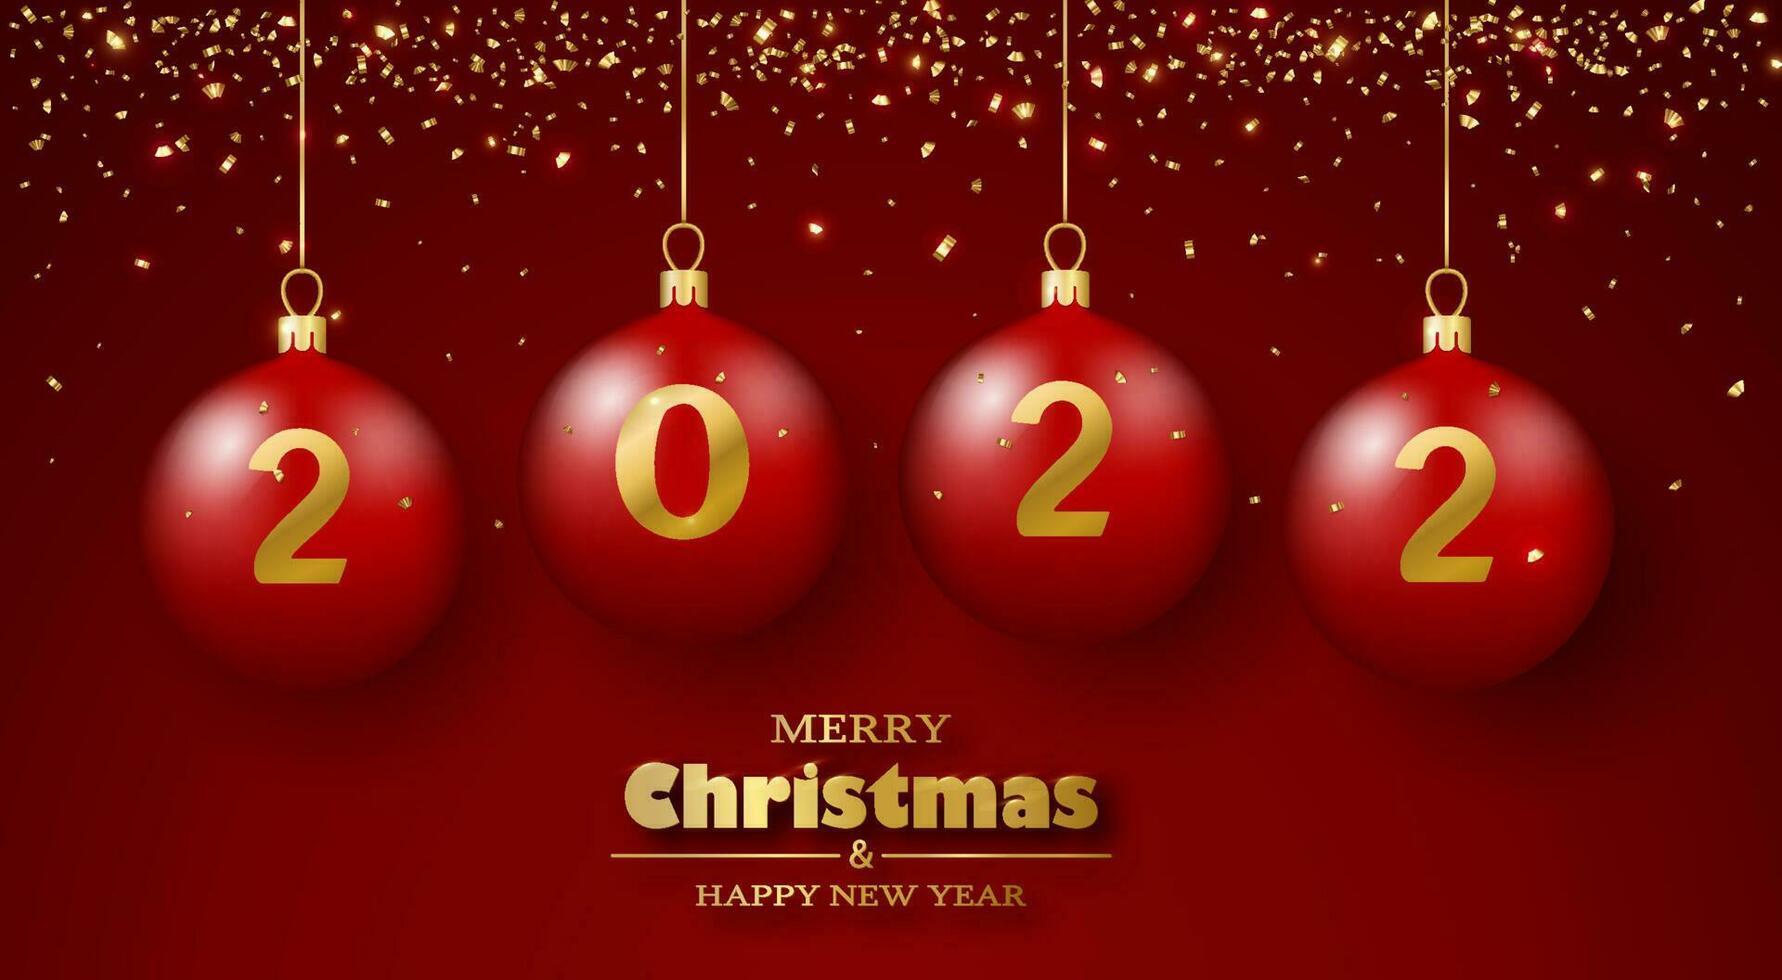 Merry Christmas and Happy New Year greeting card. Red glass balls and gold confetti. 3d realistic. vector